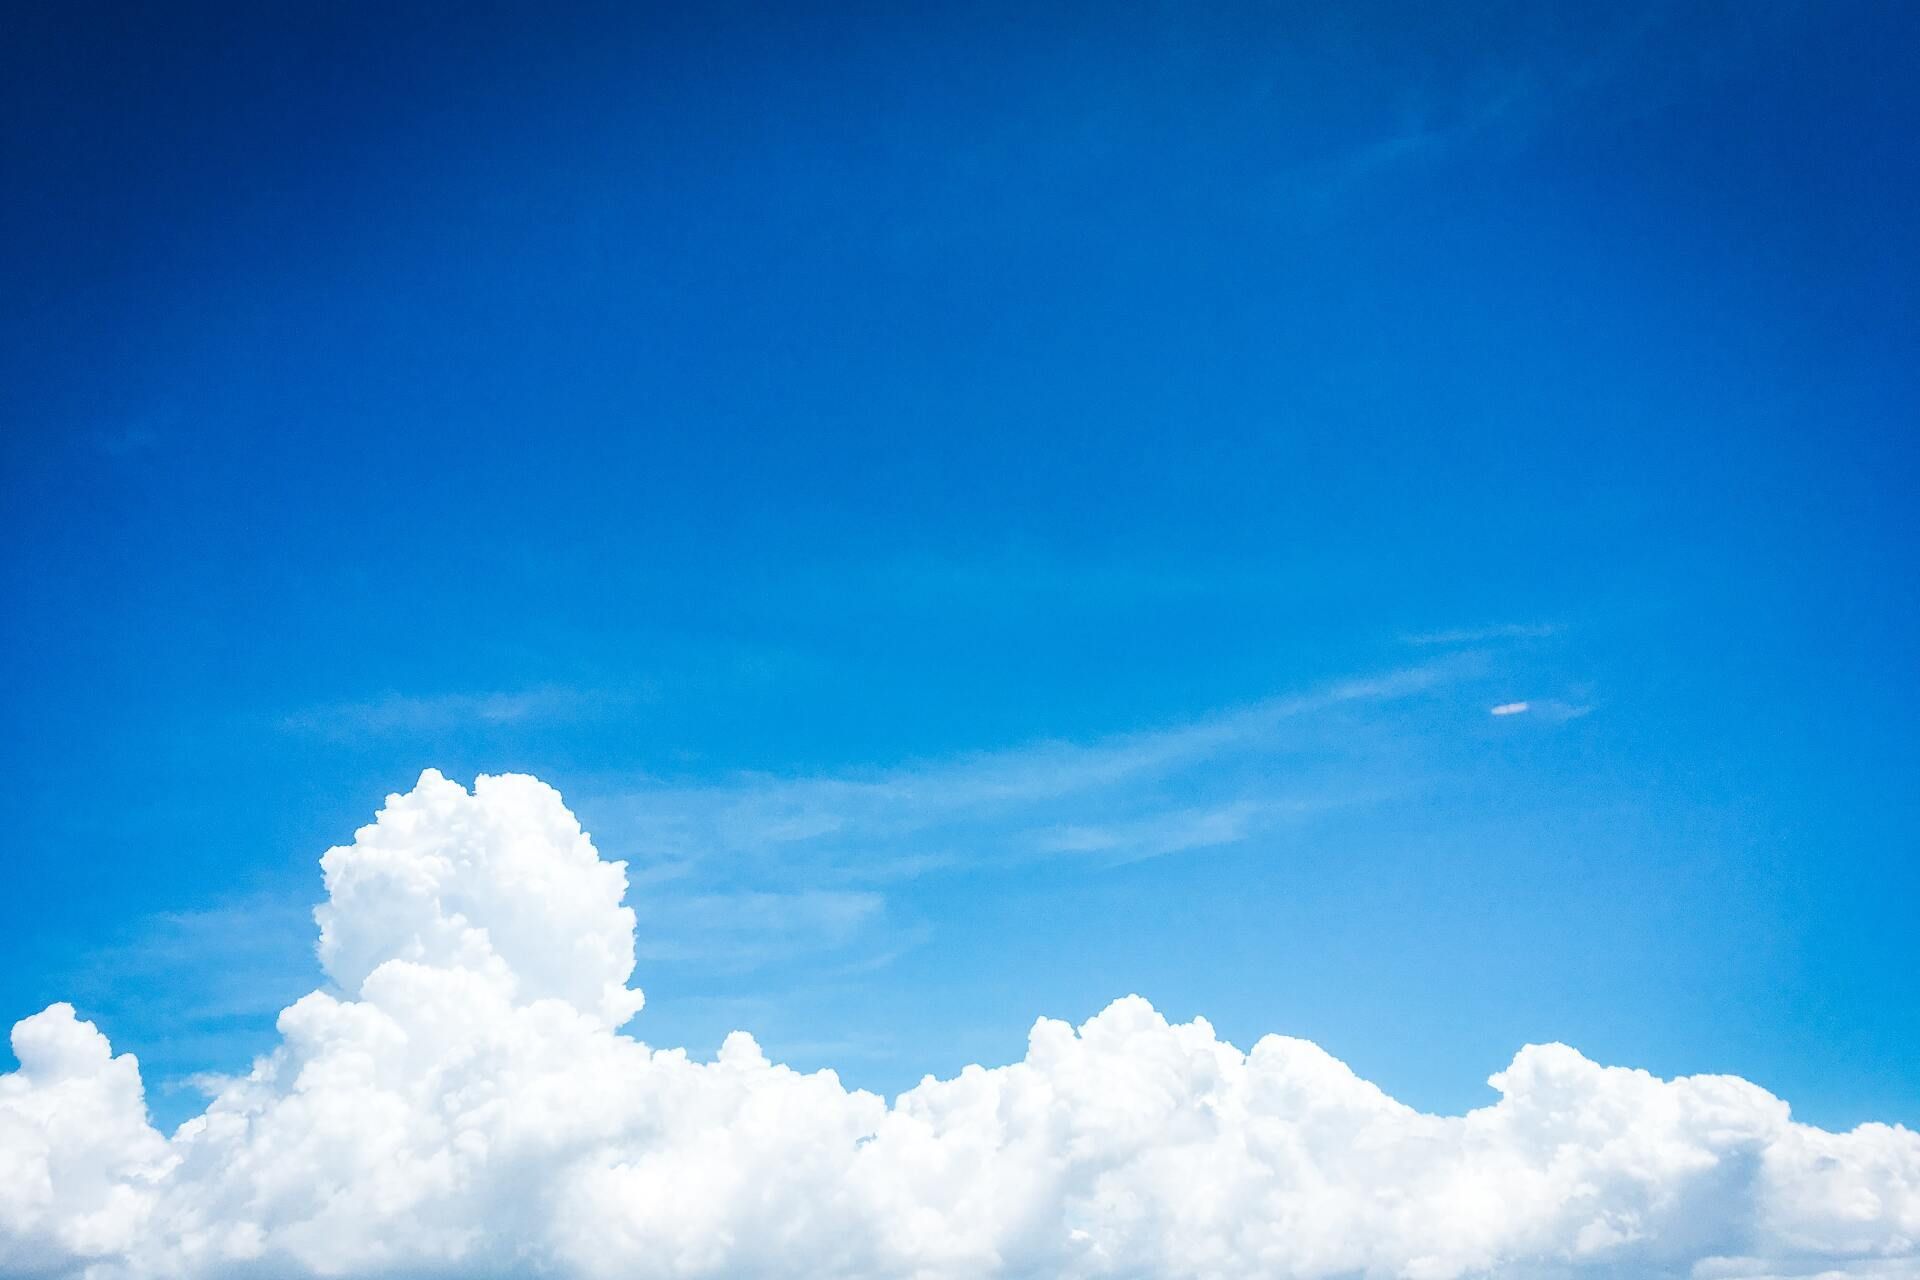 a blue sky with white clouds in it